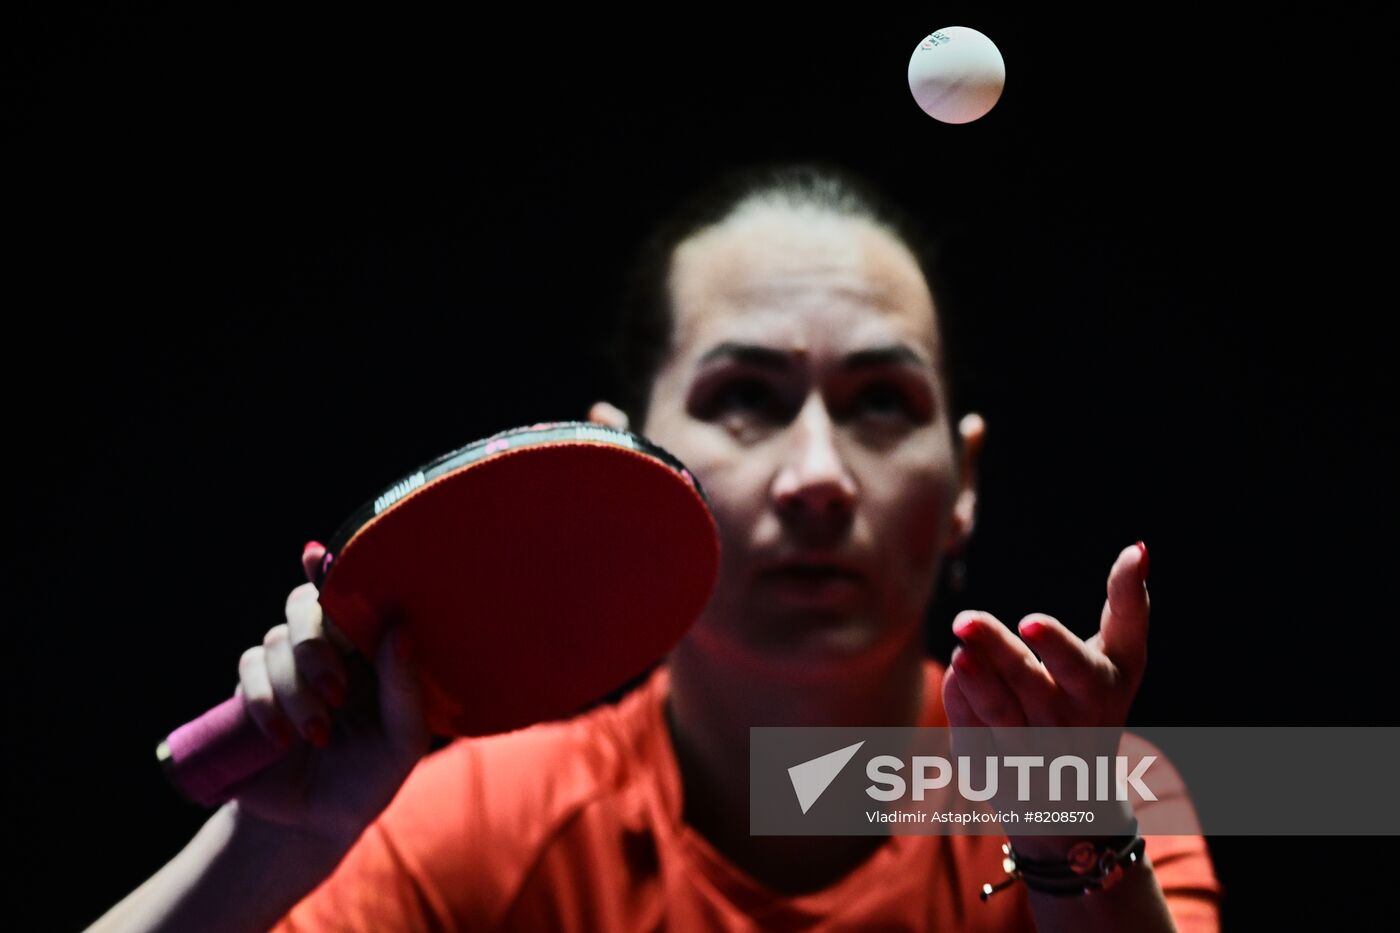 Russia Table Tennis Top 16